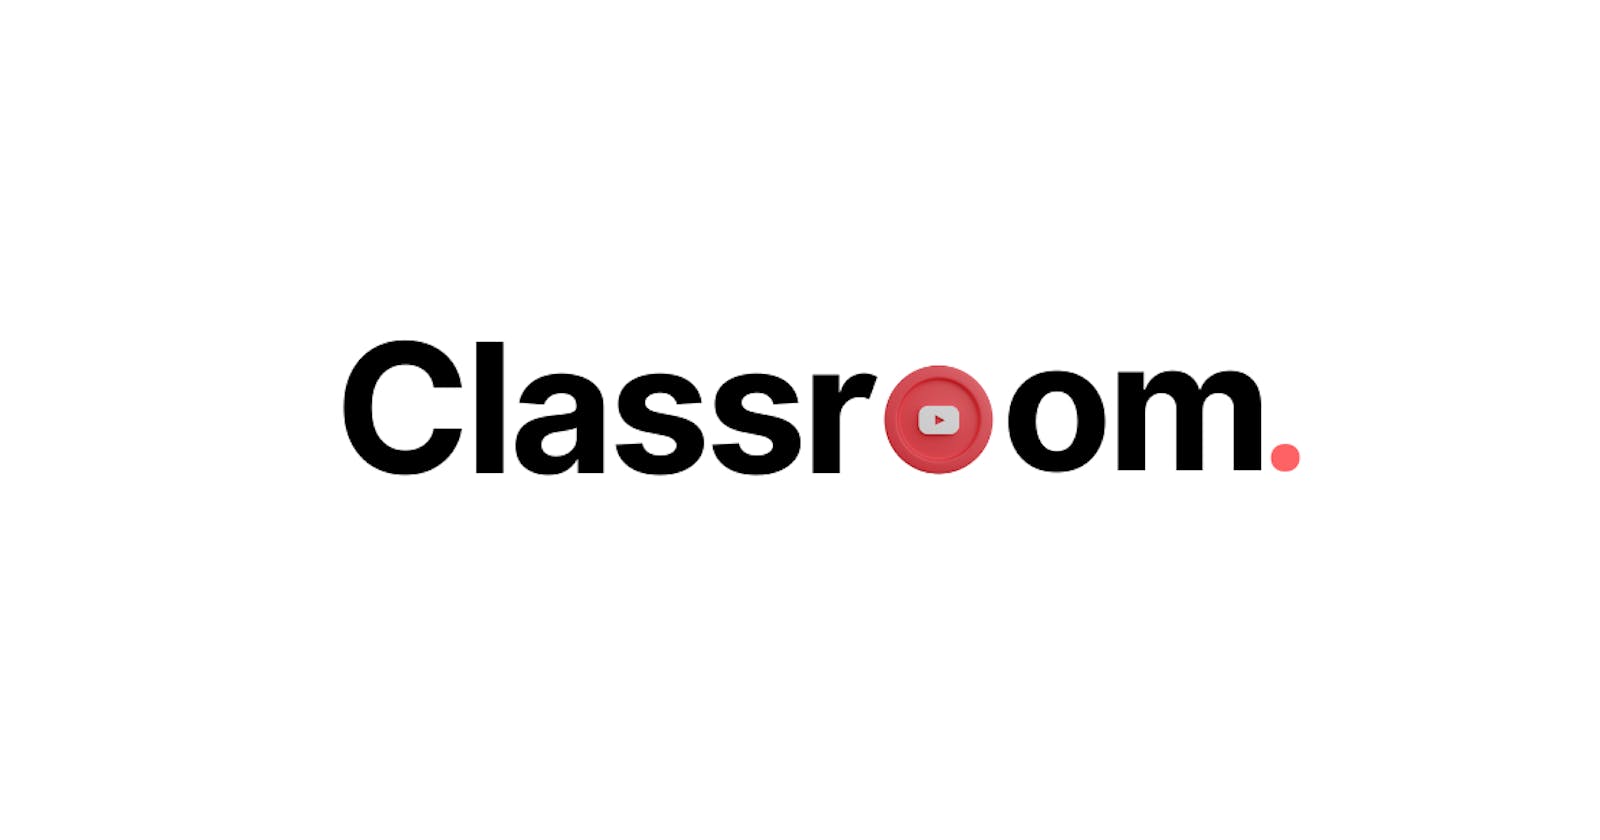 Introducing Classroom: Learning with YouTube Made Exciting